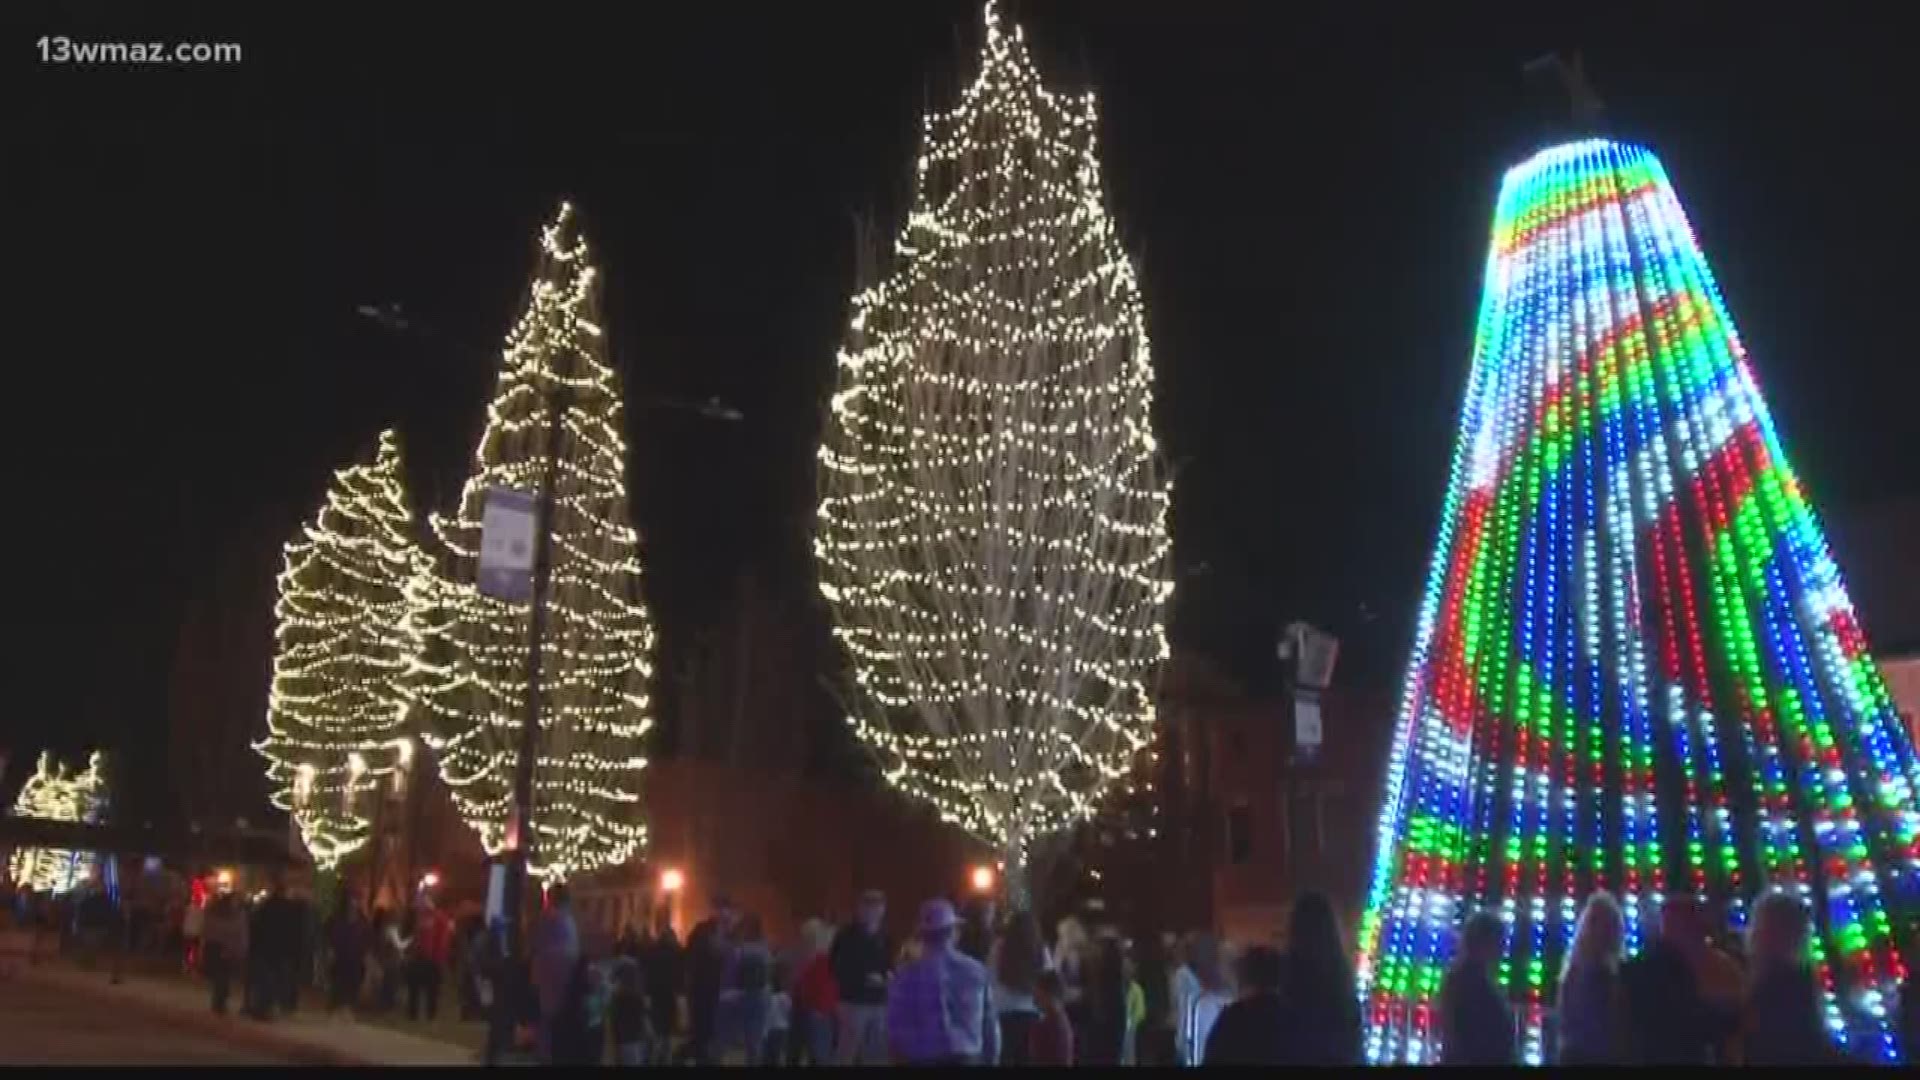 The countdown to Christmas began in downtown Macon Friday. The Christmas lights are shining brightly at the kick off of the lights extravaganza.